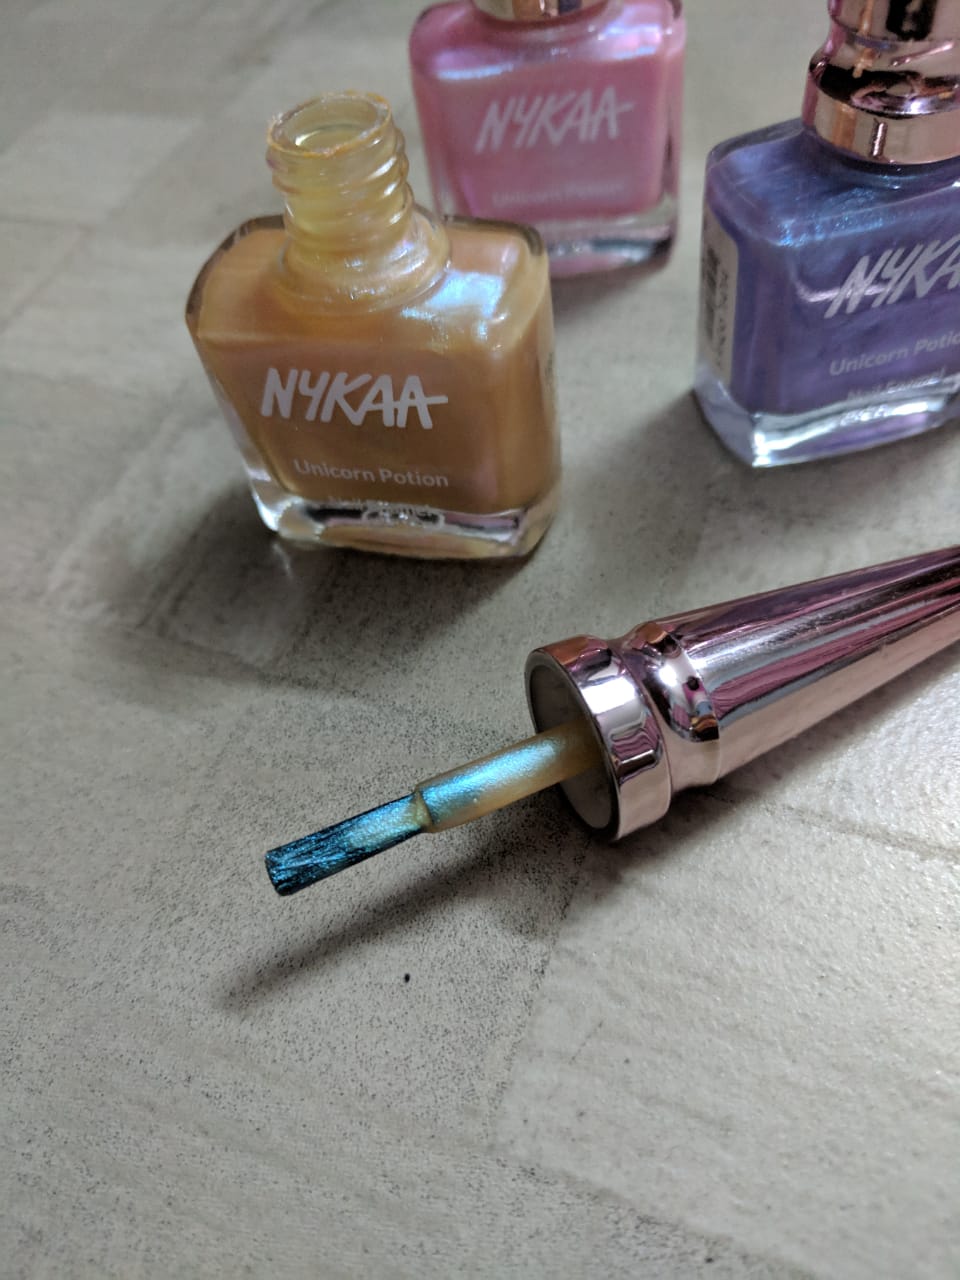 Nykaa Unicorn Potion Nail Enamel Review & Swatches| Frosted fairy, Sugar n spice, Pink peo